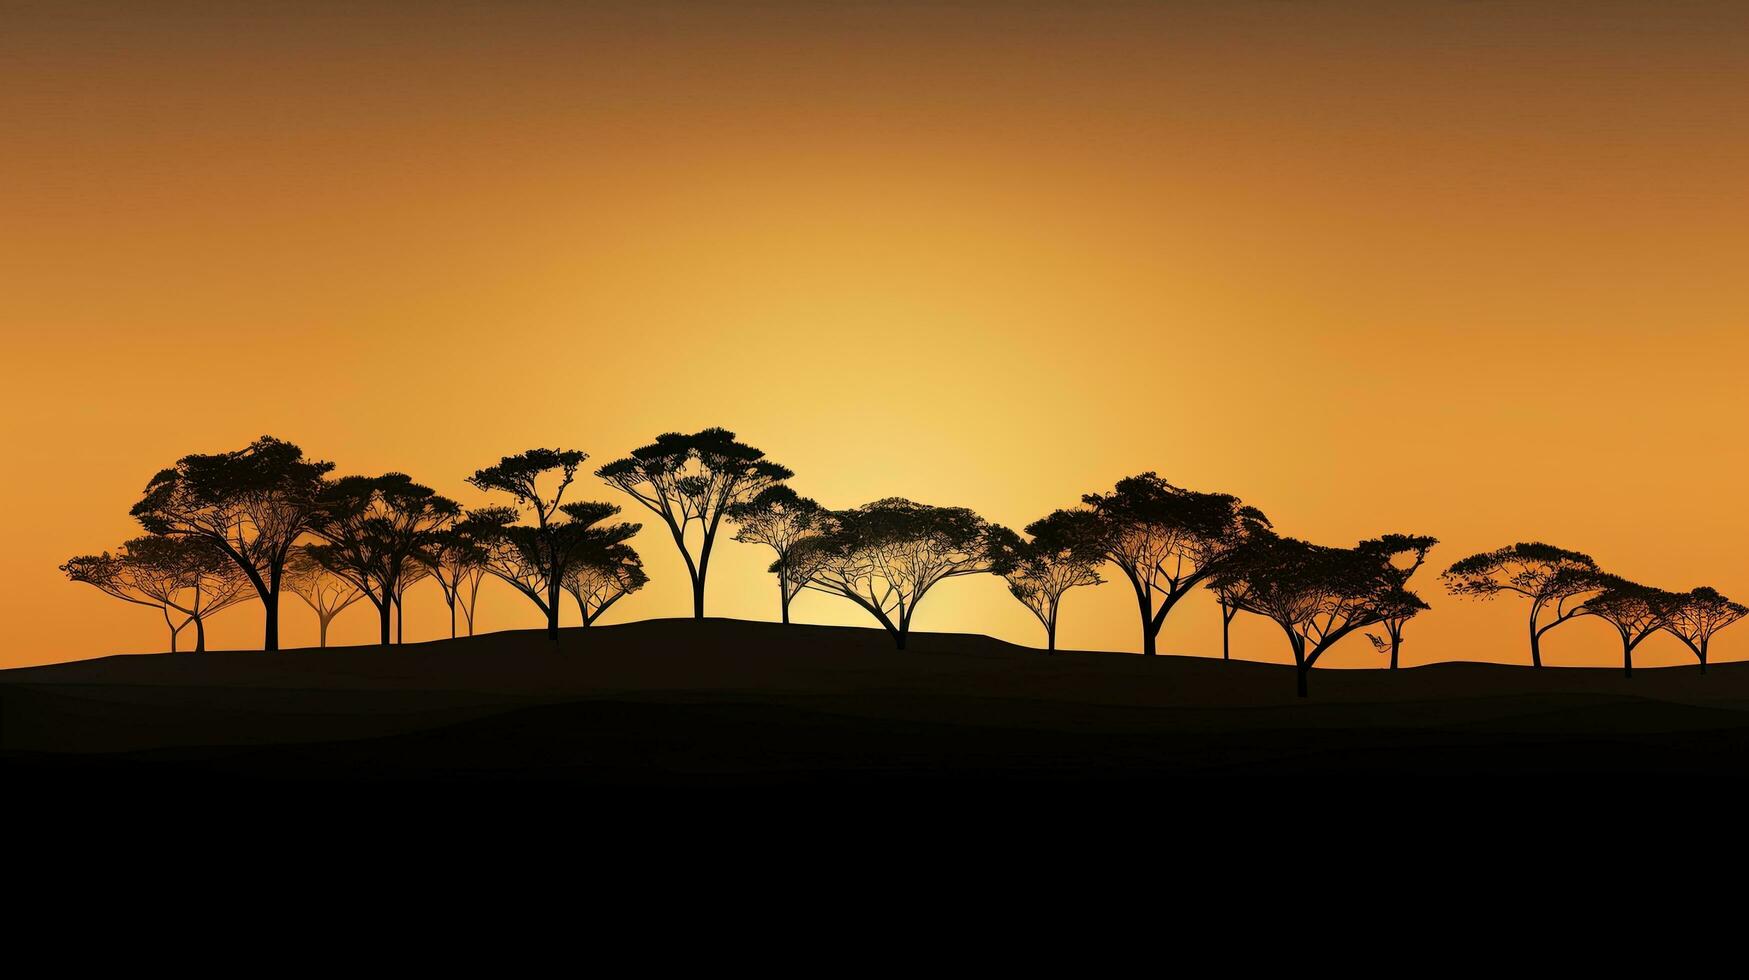 See trees on hill in farm in silhouette photo